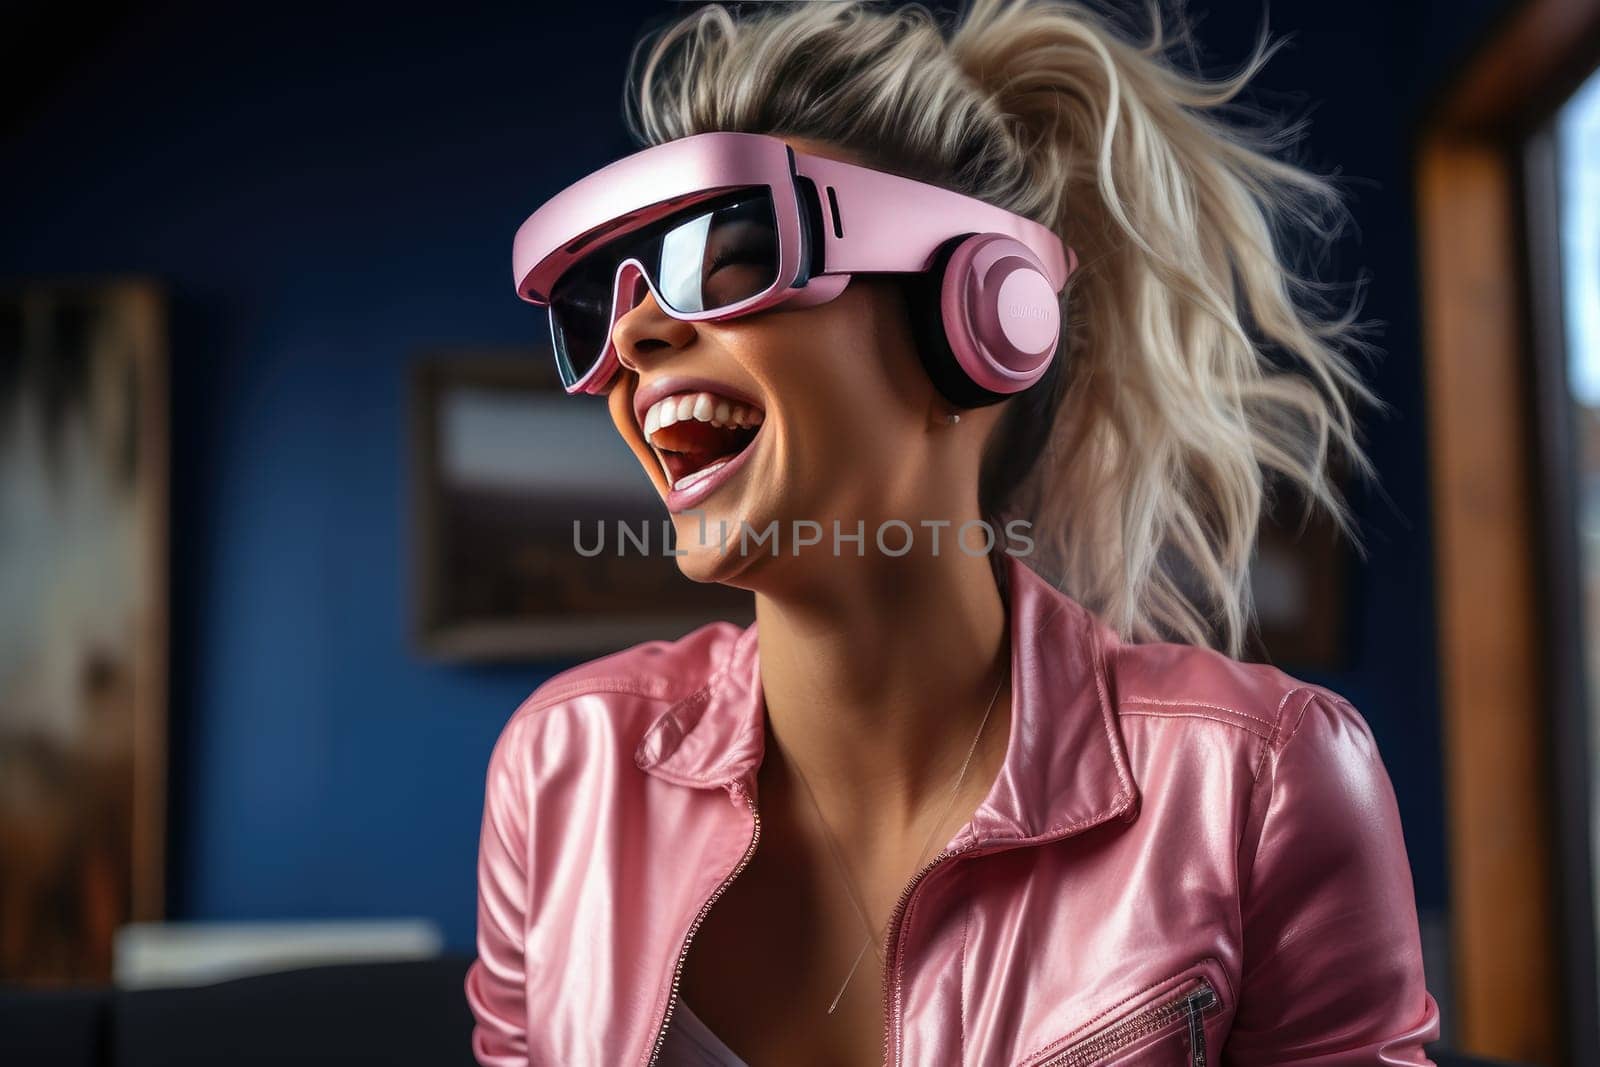 Woman wearing a virtual reality headset and electronic amplification device, experiencing a captivating digital simulation. Concept of advanced technology, entertainment, and immersive experiences.